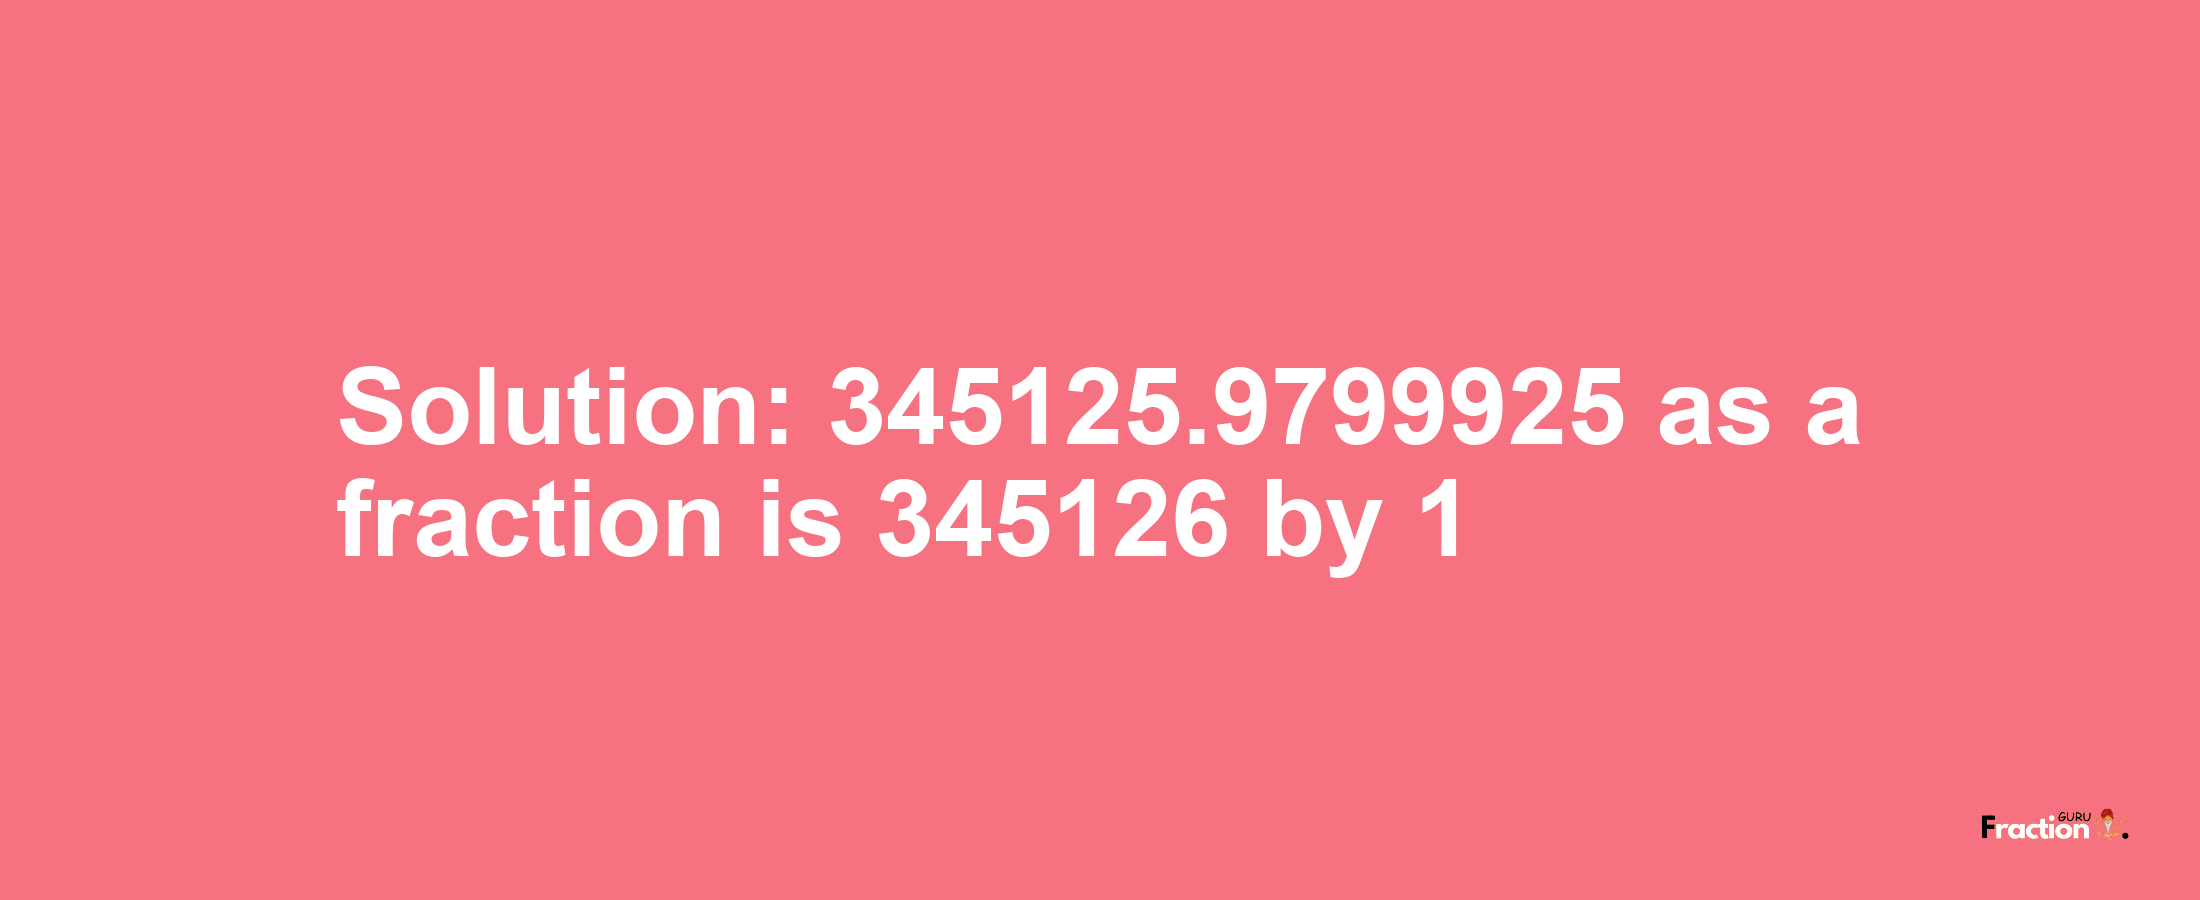 Solution:345125.9799925 as a fraction is 345126/1